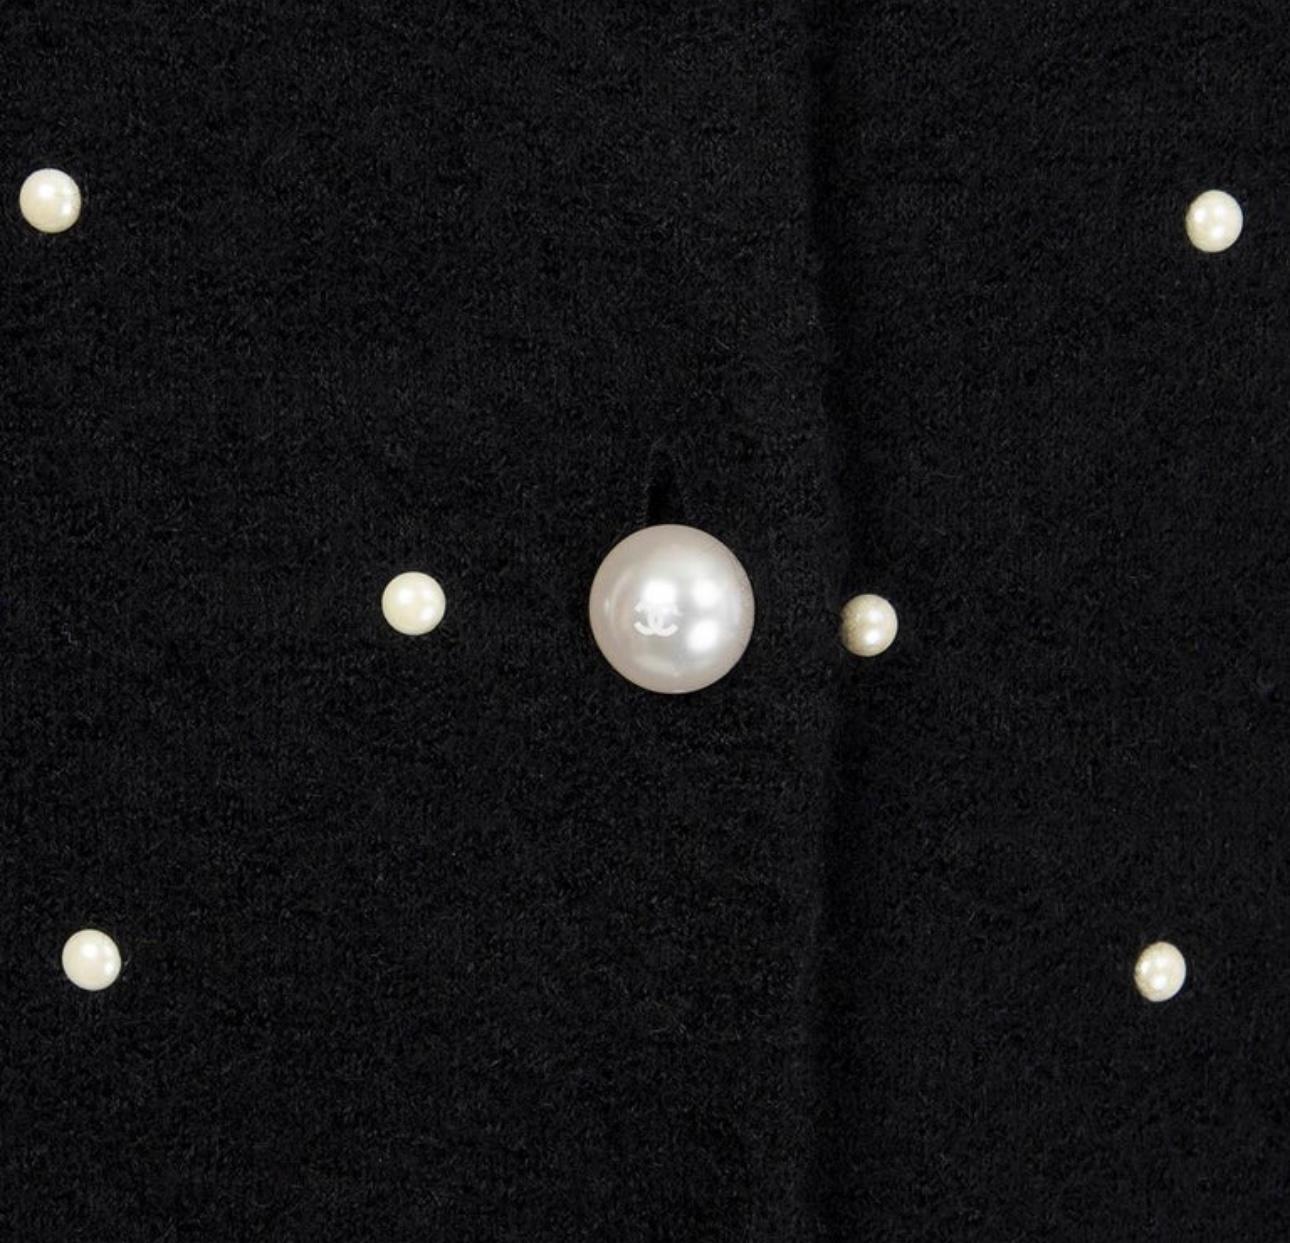 Charming Chanel black mohair cardigan with pearl embellishment and CC logo pearl buttons
Size mark 36 FR. Never worn
